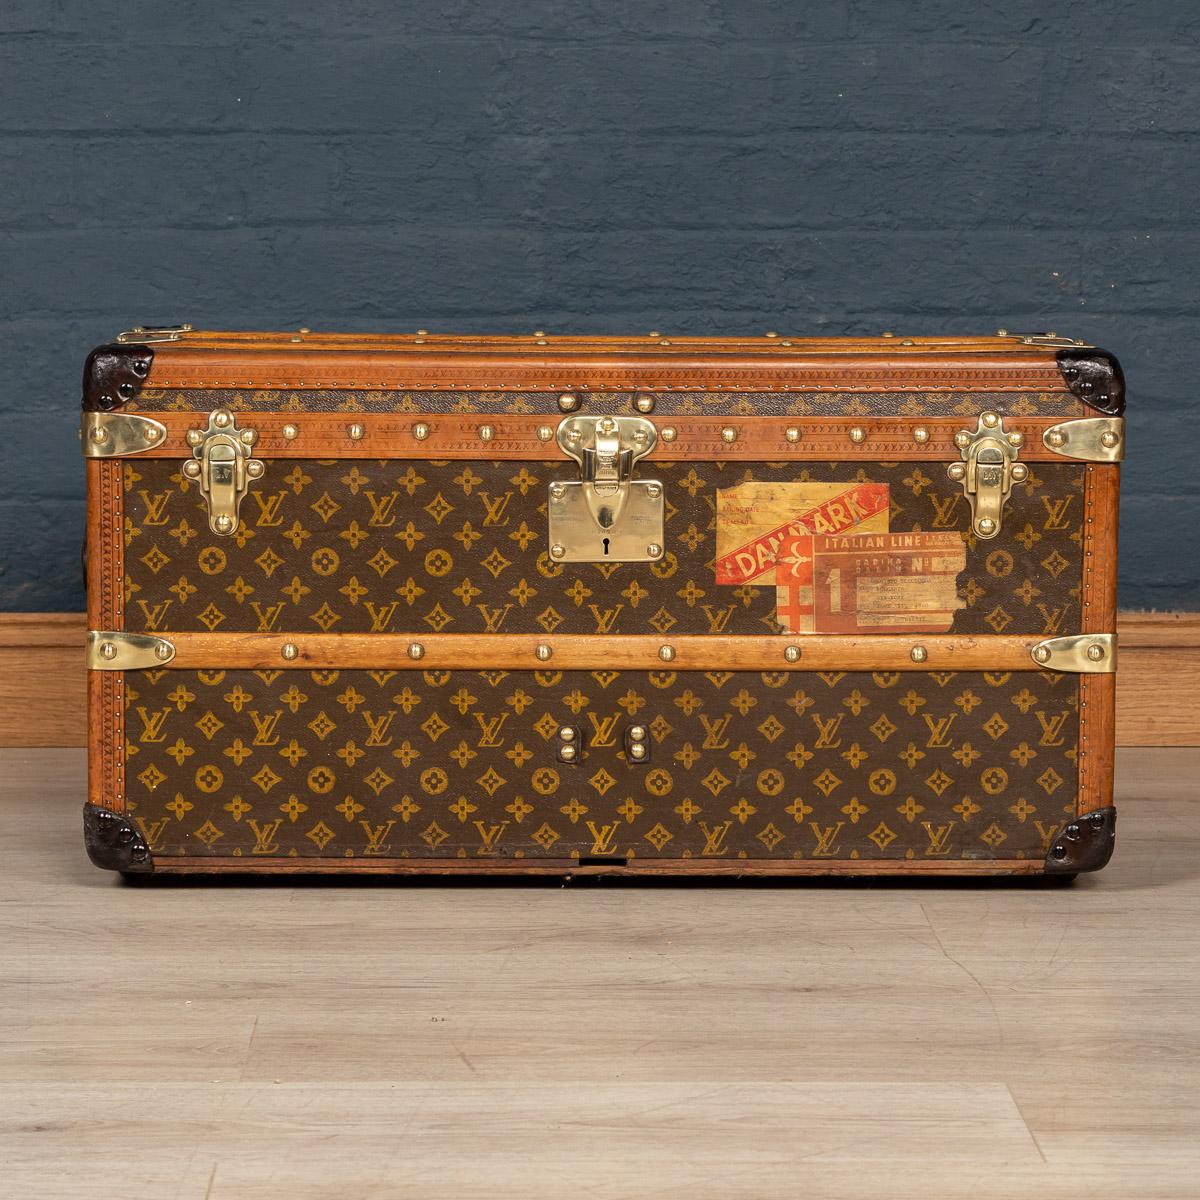 Antique 20th century beautiful and very rare shoe trunk by Louis Vuitton, with vibrant monogram, lozine trim and brass fittings, this trunk is a must have item for any elite traveller harking back to times of passenger ships and 1st class travel of